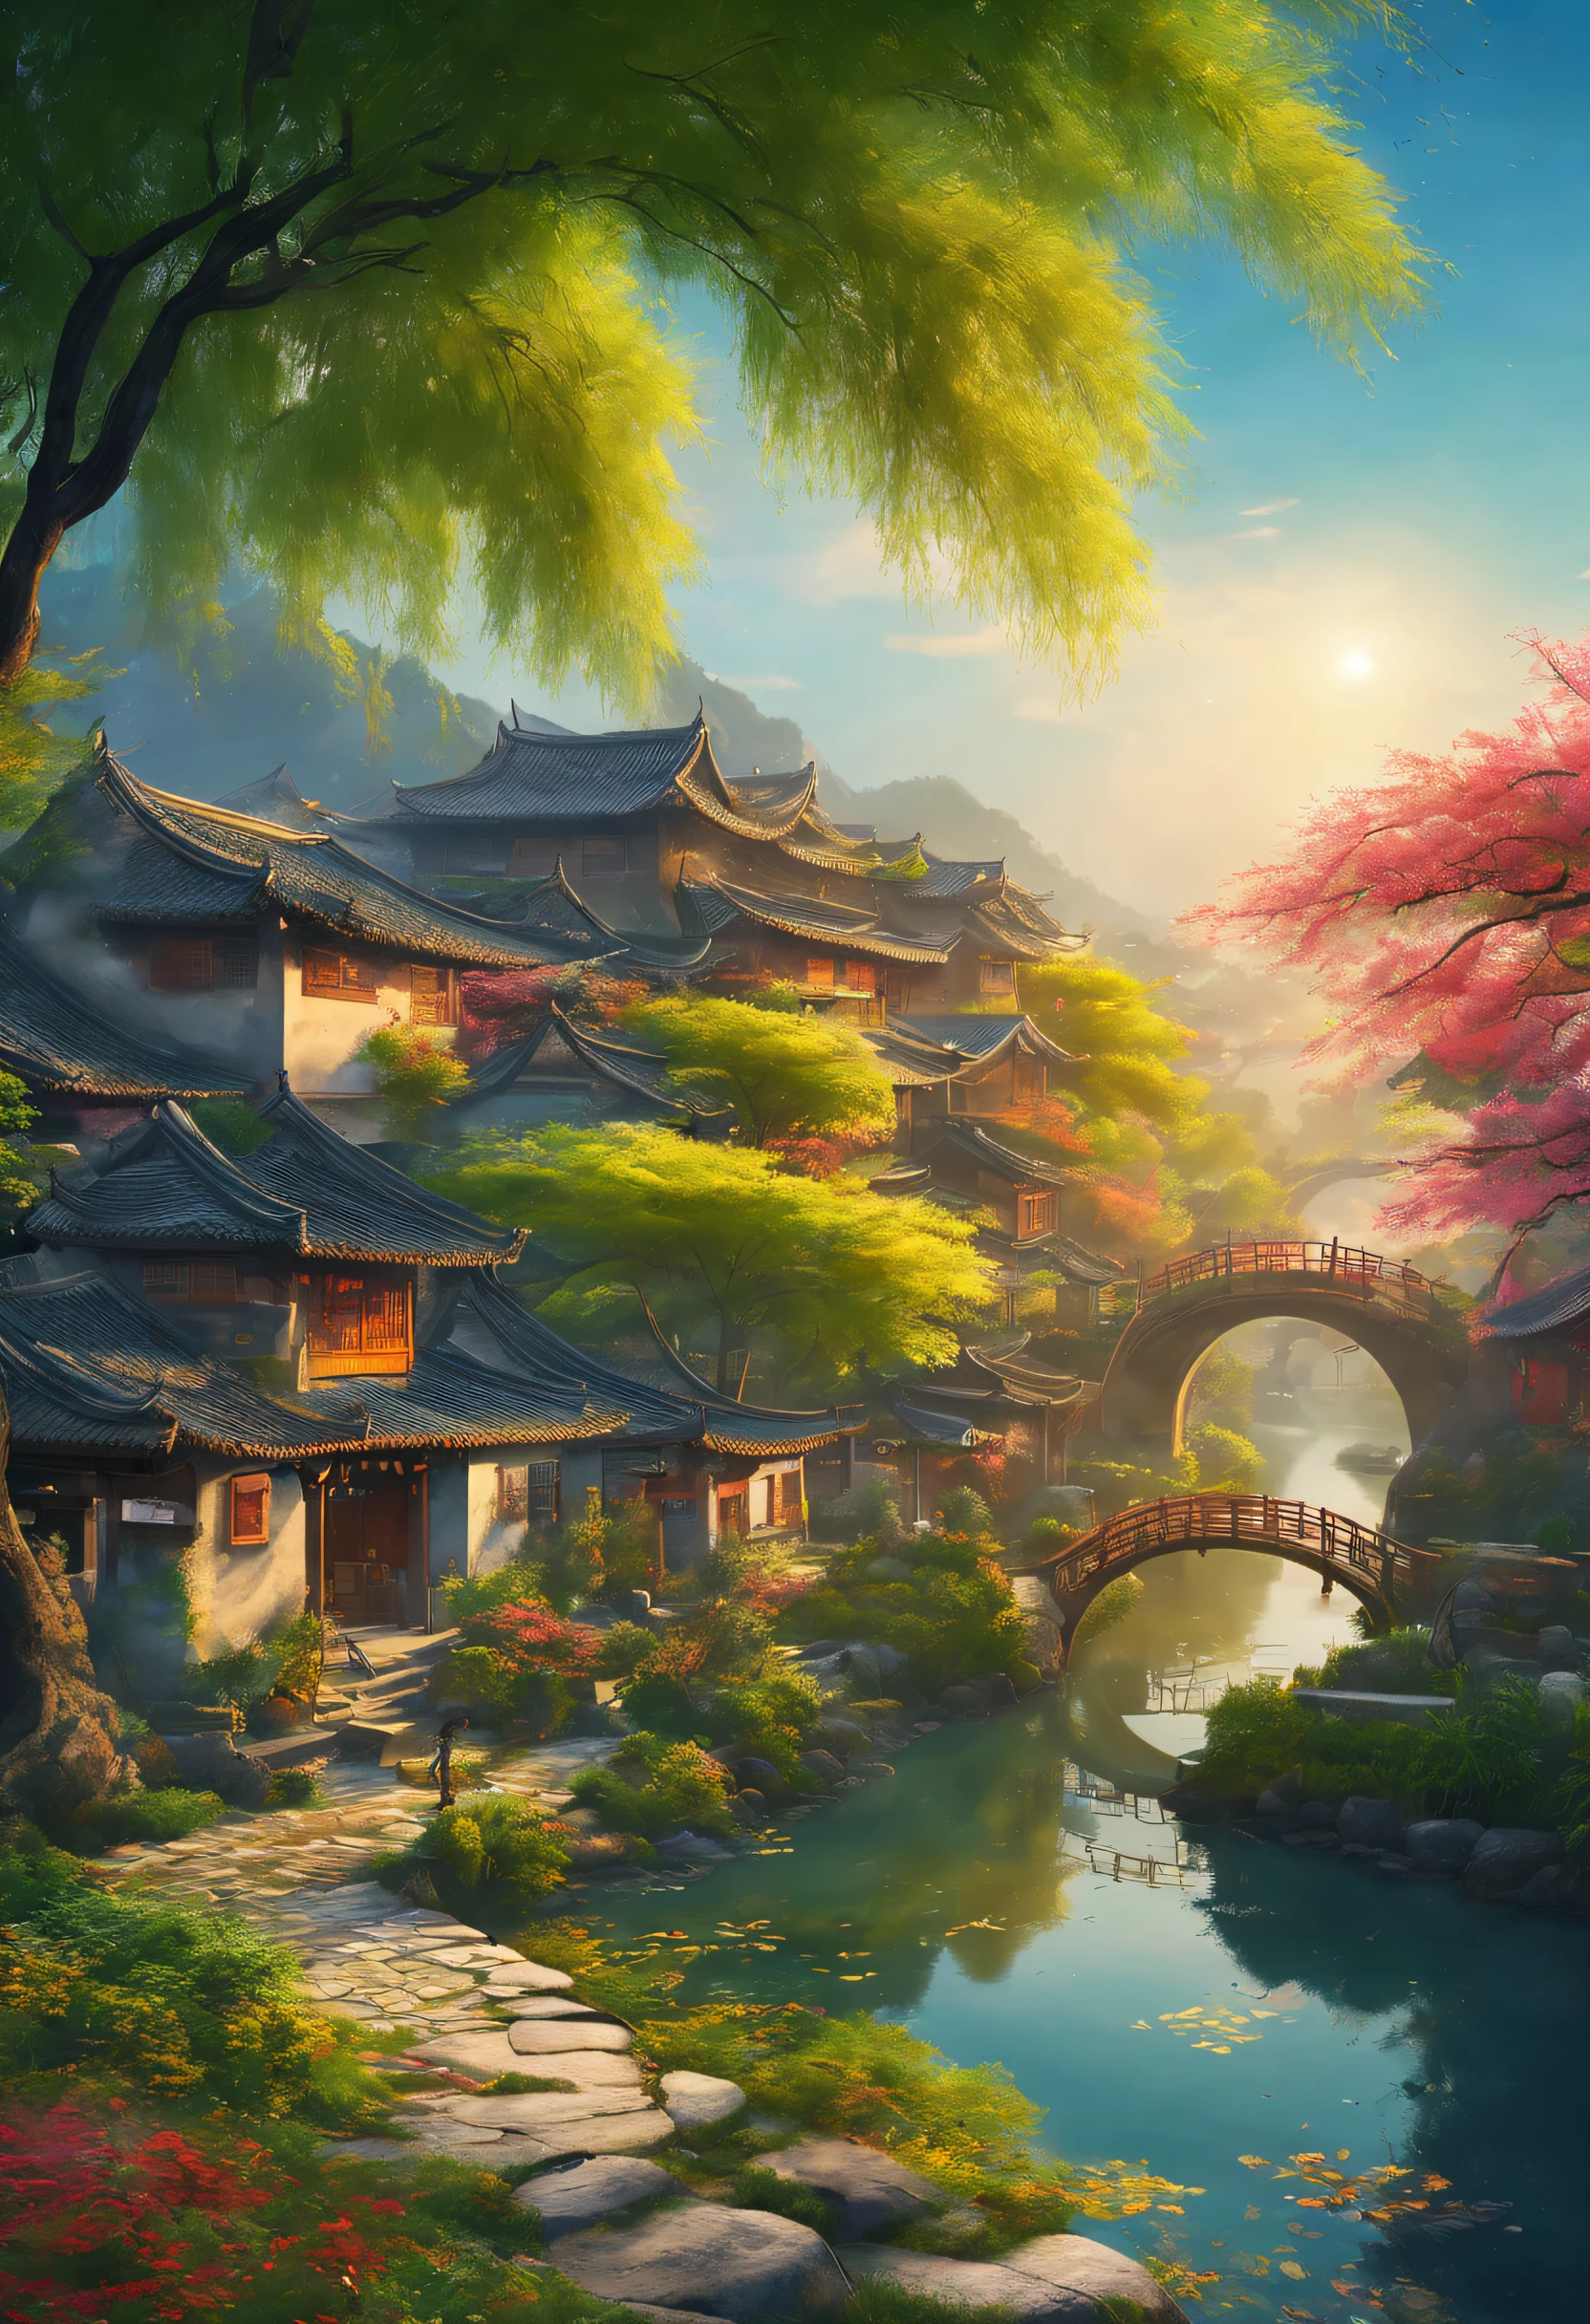 （vibrant with colors），（Semi-realistic），A vibrant riverside scene in ancient China，(Tranquil river water)Show on the(Elegant arch bridge)Oblivity，(Local villagers)'s(Picturesque residence)，（Ming dynasty depiction：1.1），Jiangnan Ancient Town，Small bridges and flowing water，Peaceful farmland outside the bustling city，（Sunny morning:1.2），（fine brushwork：1.1），Dynamic depiction，Panorama of the water's edge，Authentic atmosphere，Vivid authenticity，mesmerizing charm，Rich picture，8K resolution